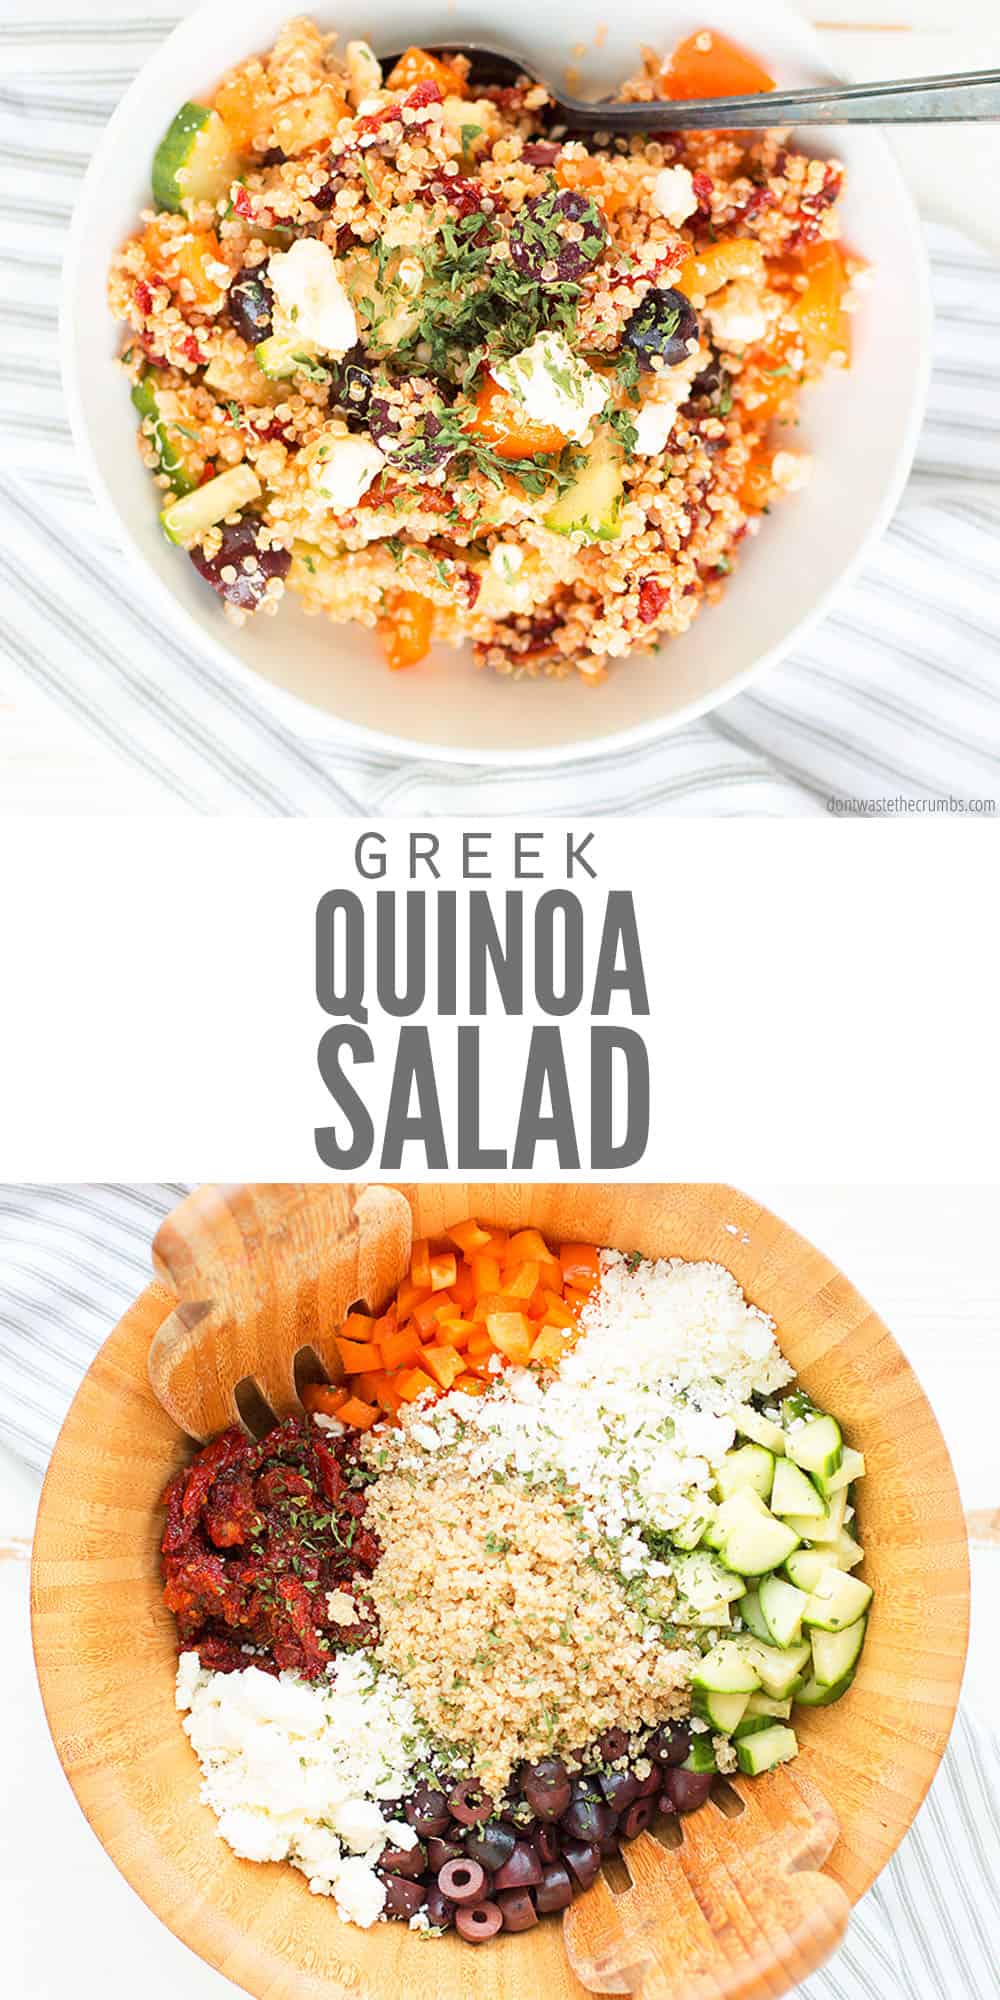 Quick Greek Quinoa Salad (easy option with chicken, chickpeas or shrimp)